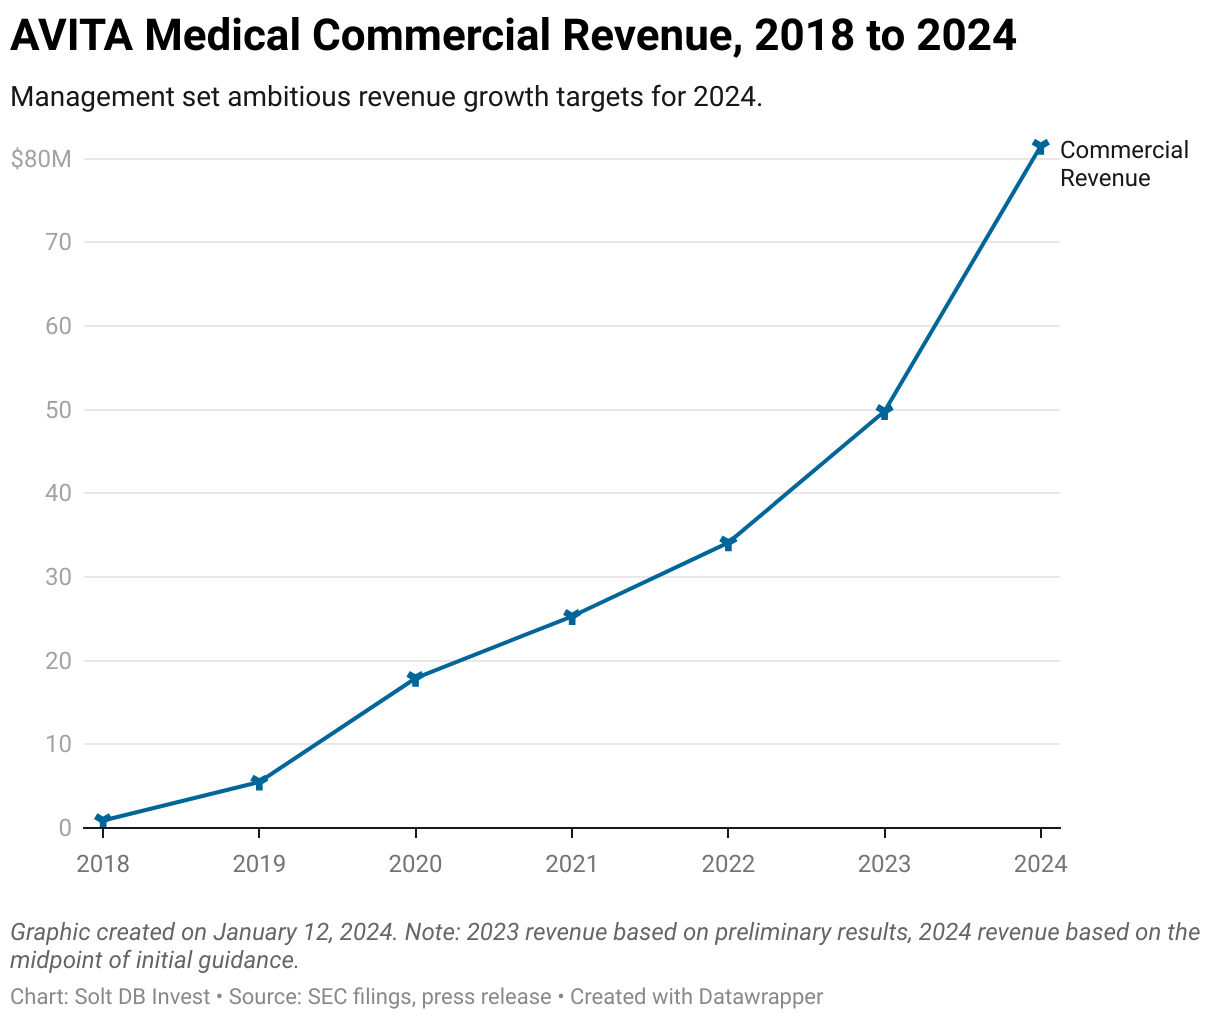 A chart displaying AVITA Medical's commercial revenue from 2018 through expected performance in 2024.